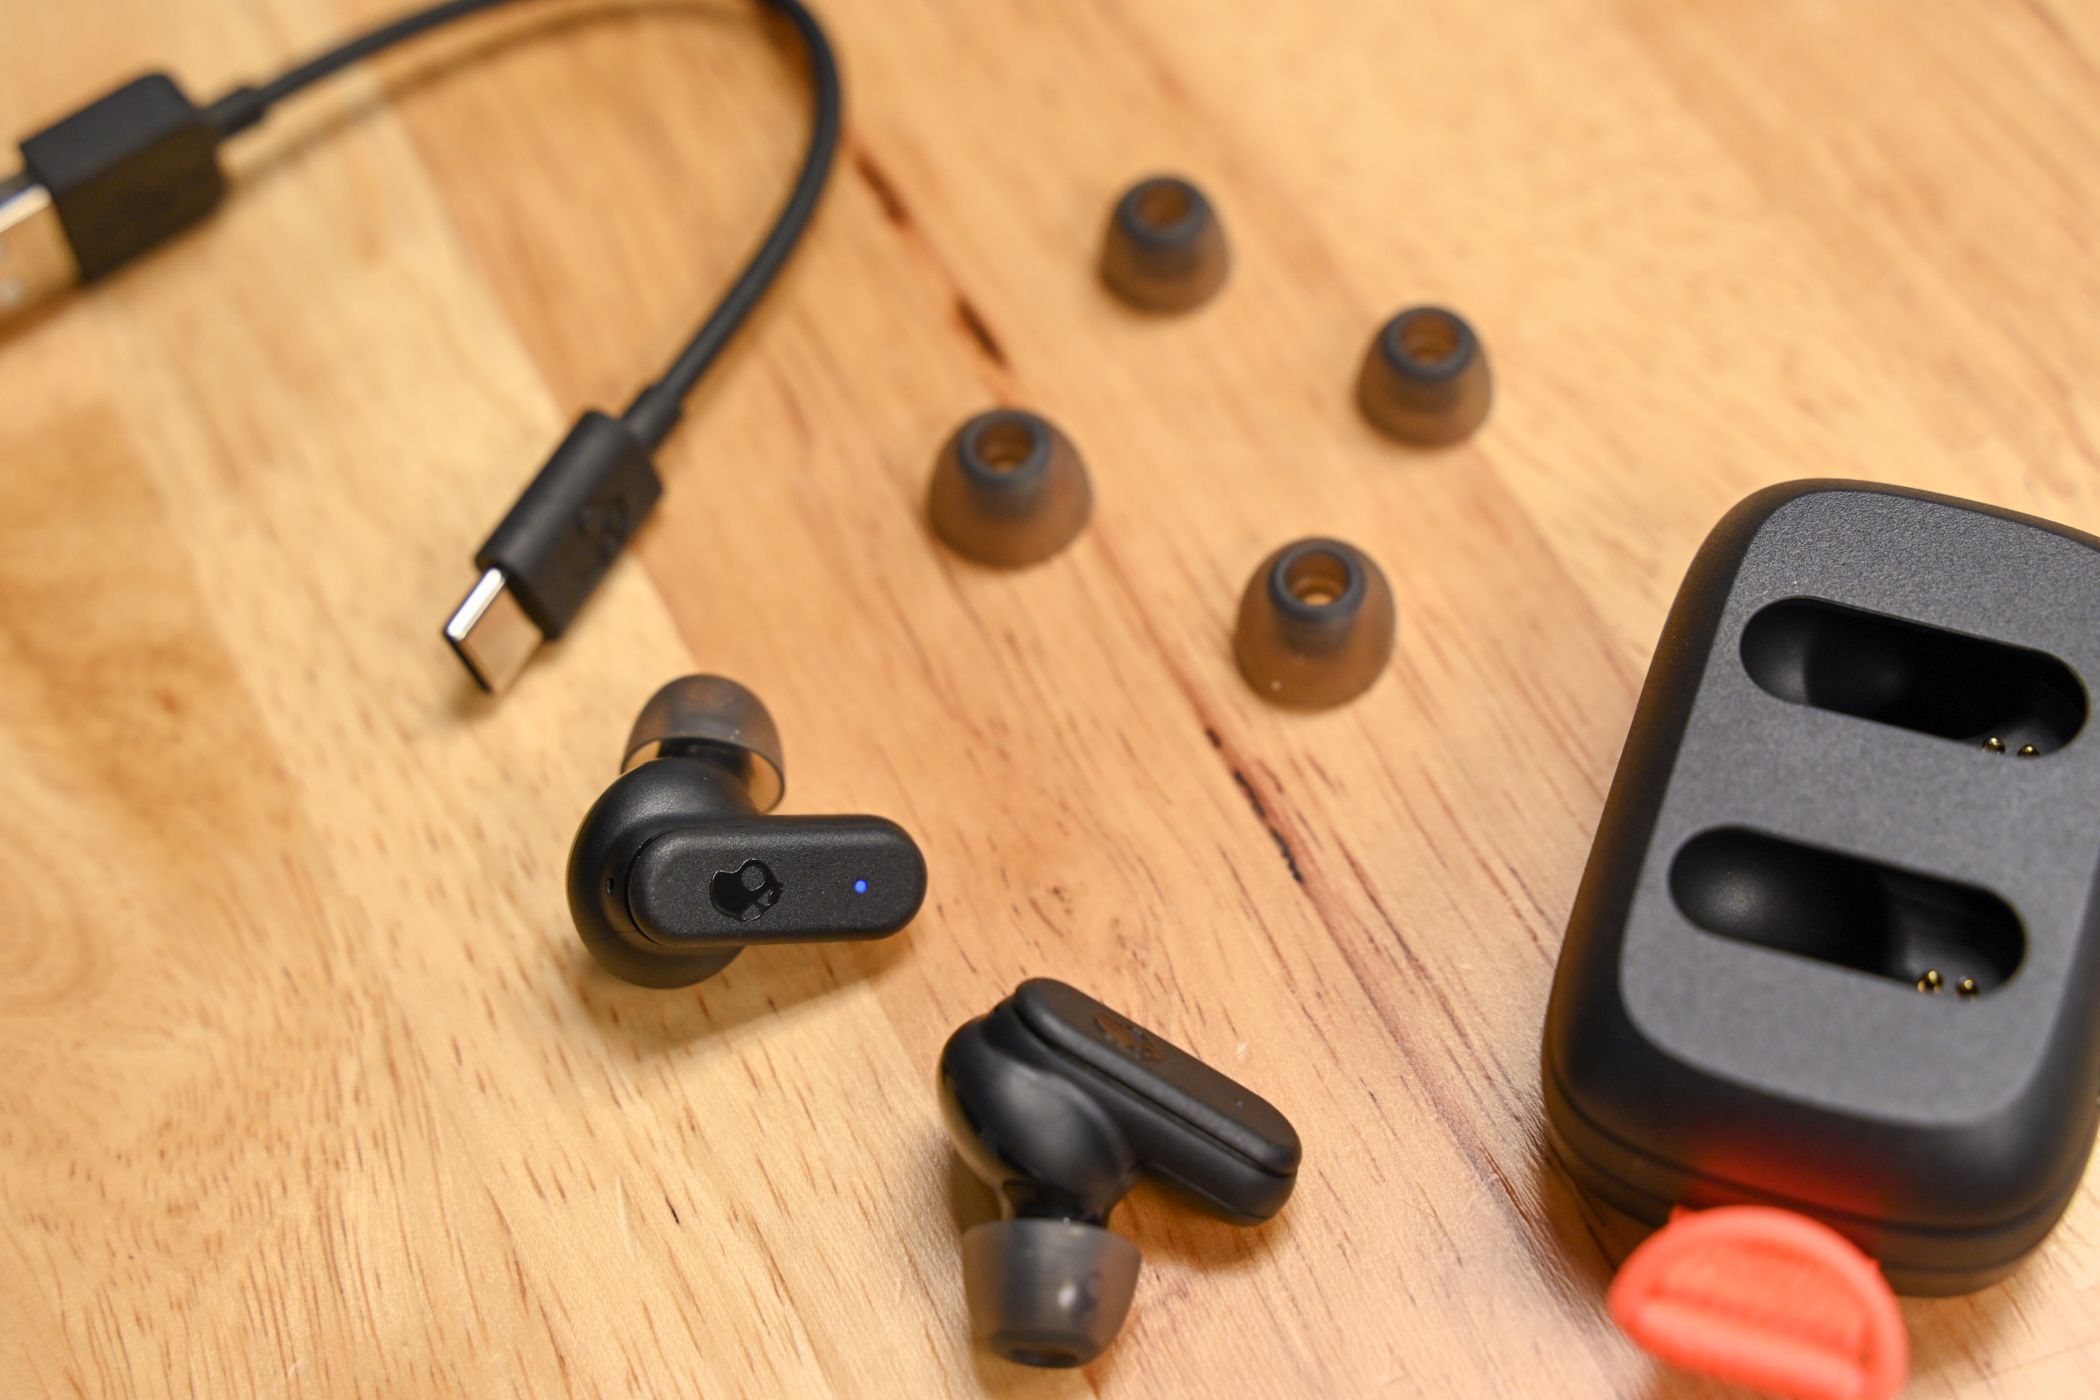 The Skullcandy Dime 3 True Wireless Earbuds with its accessories